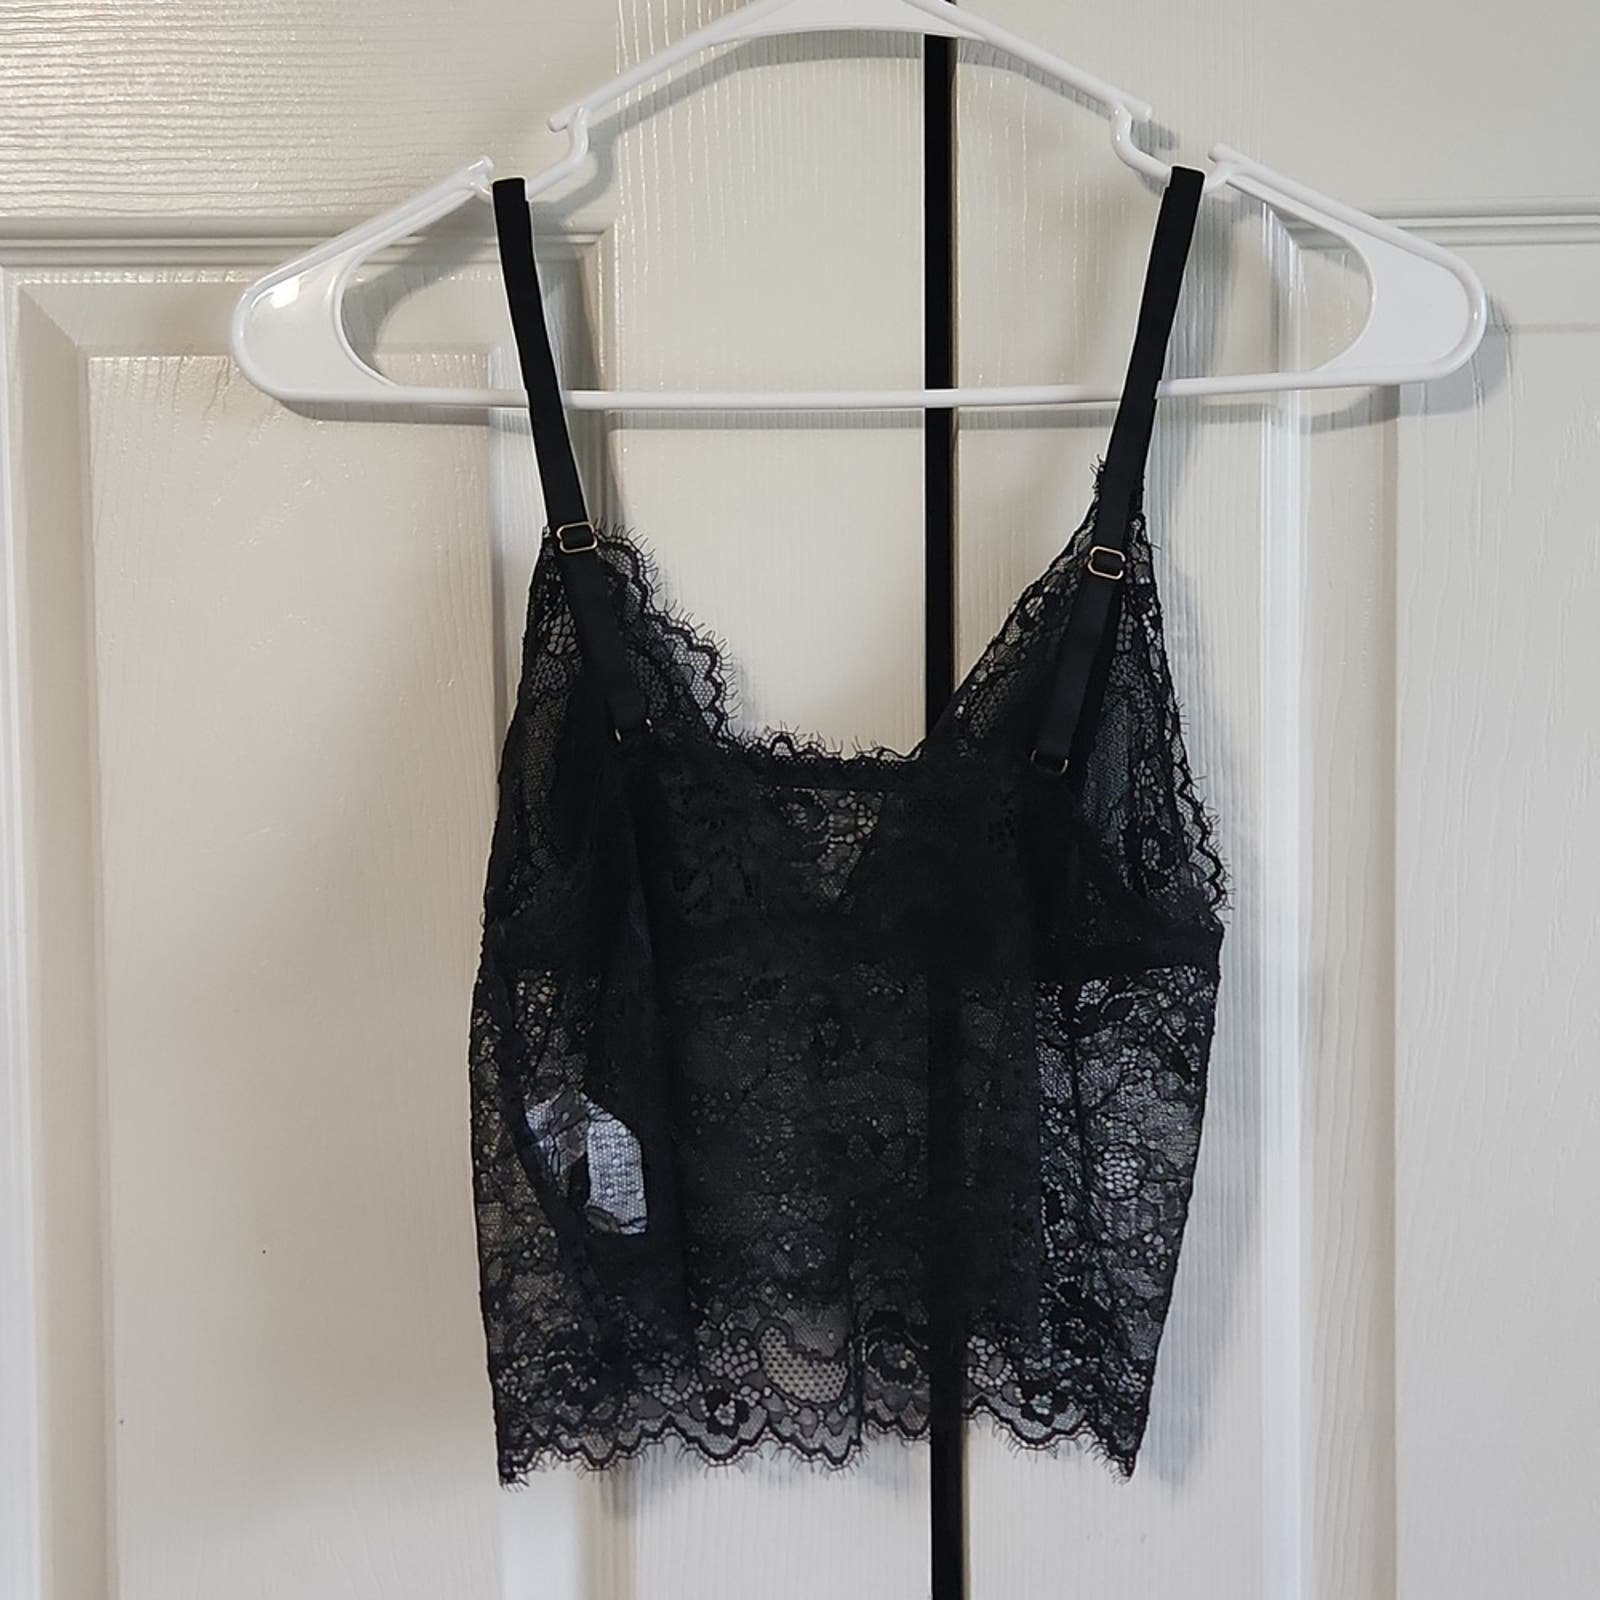 Simple Women´s Black Sexy Sheer Lace V-neck Spaghetti Strap Crop Top Cami Vest Bra SM nFIsxGuES US Outlet